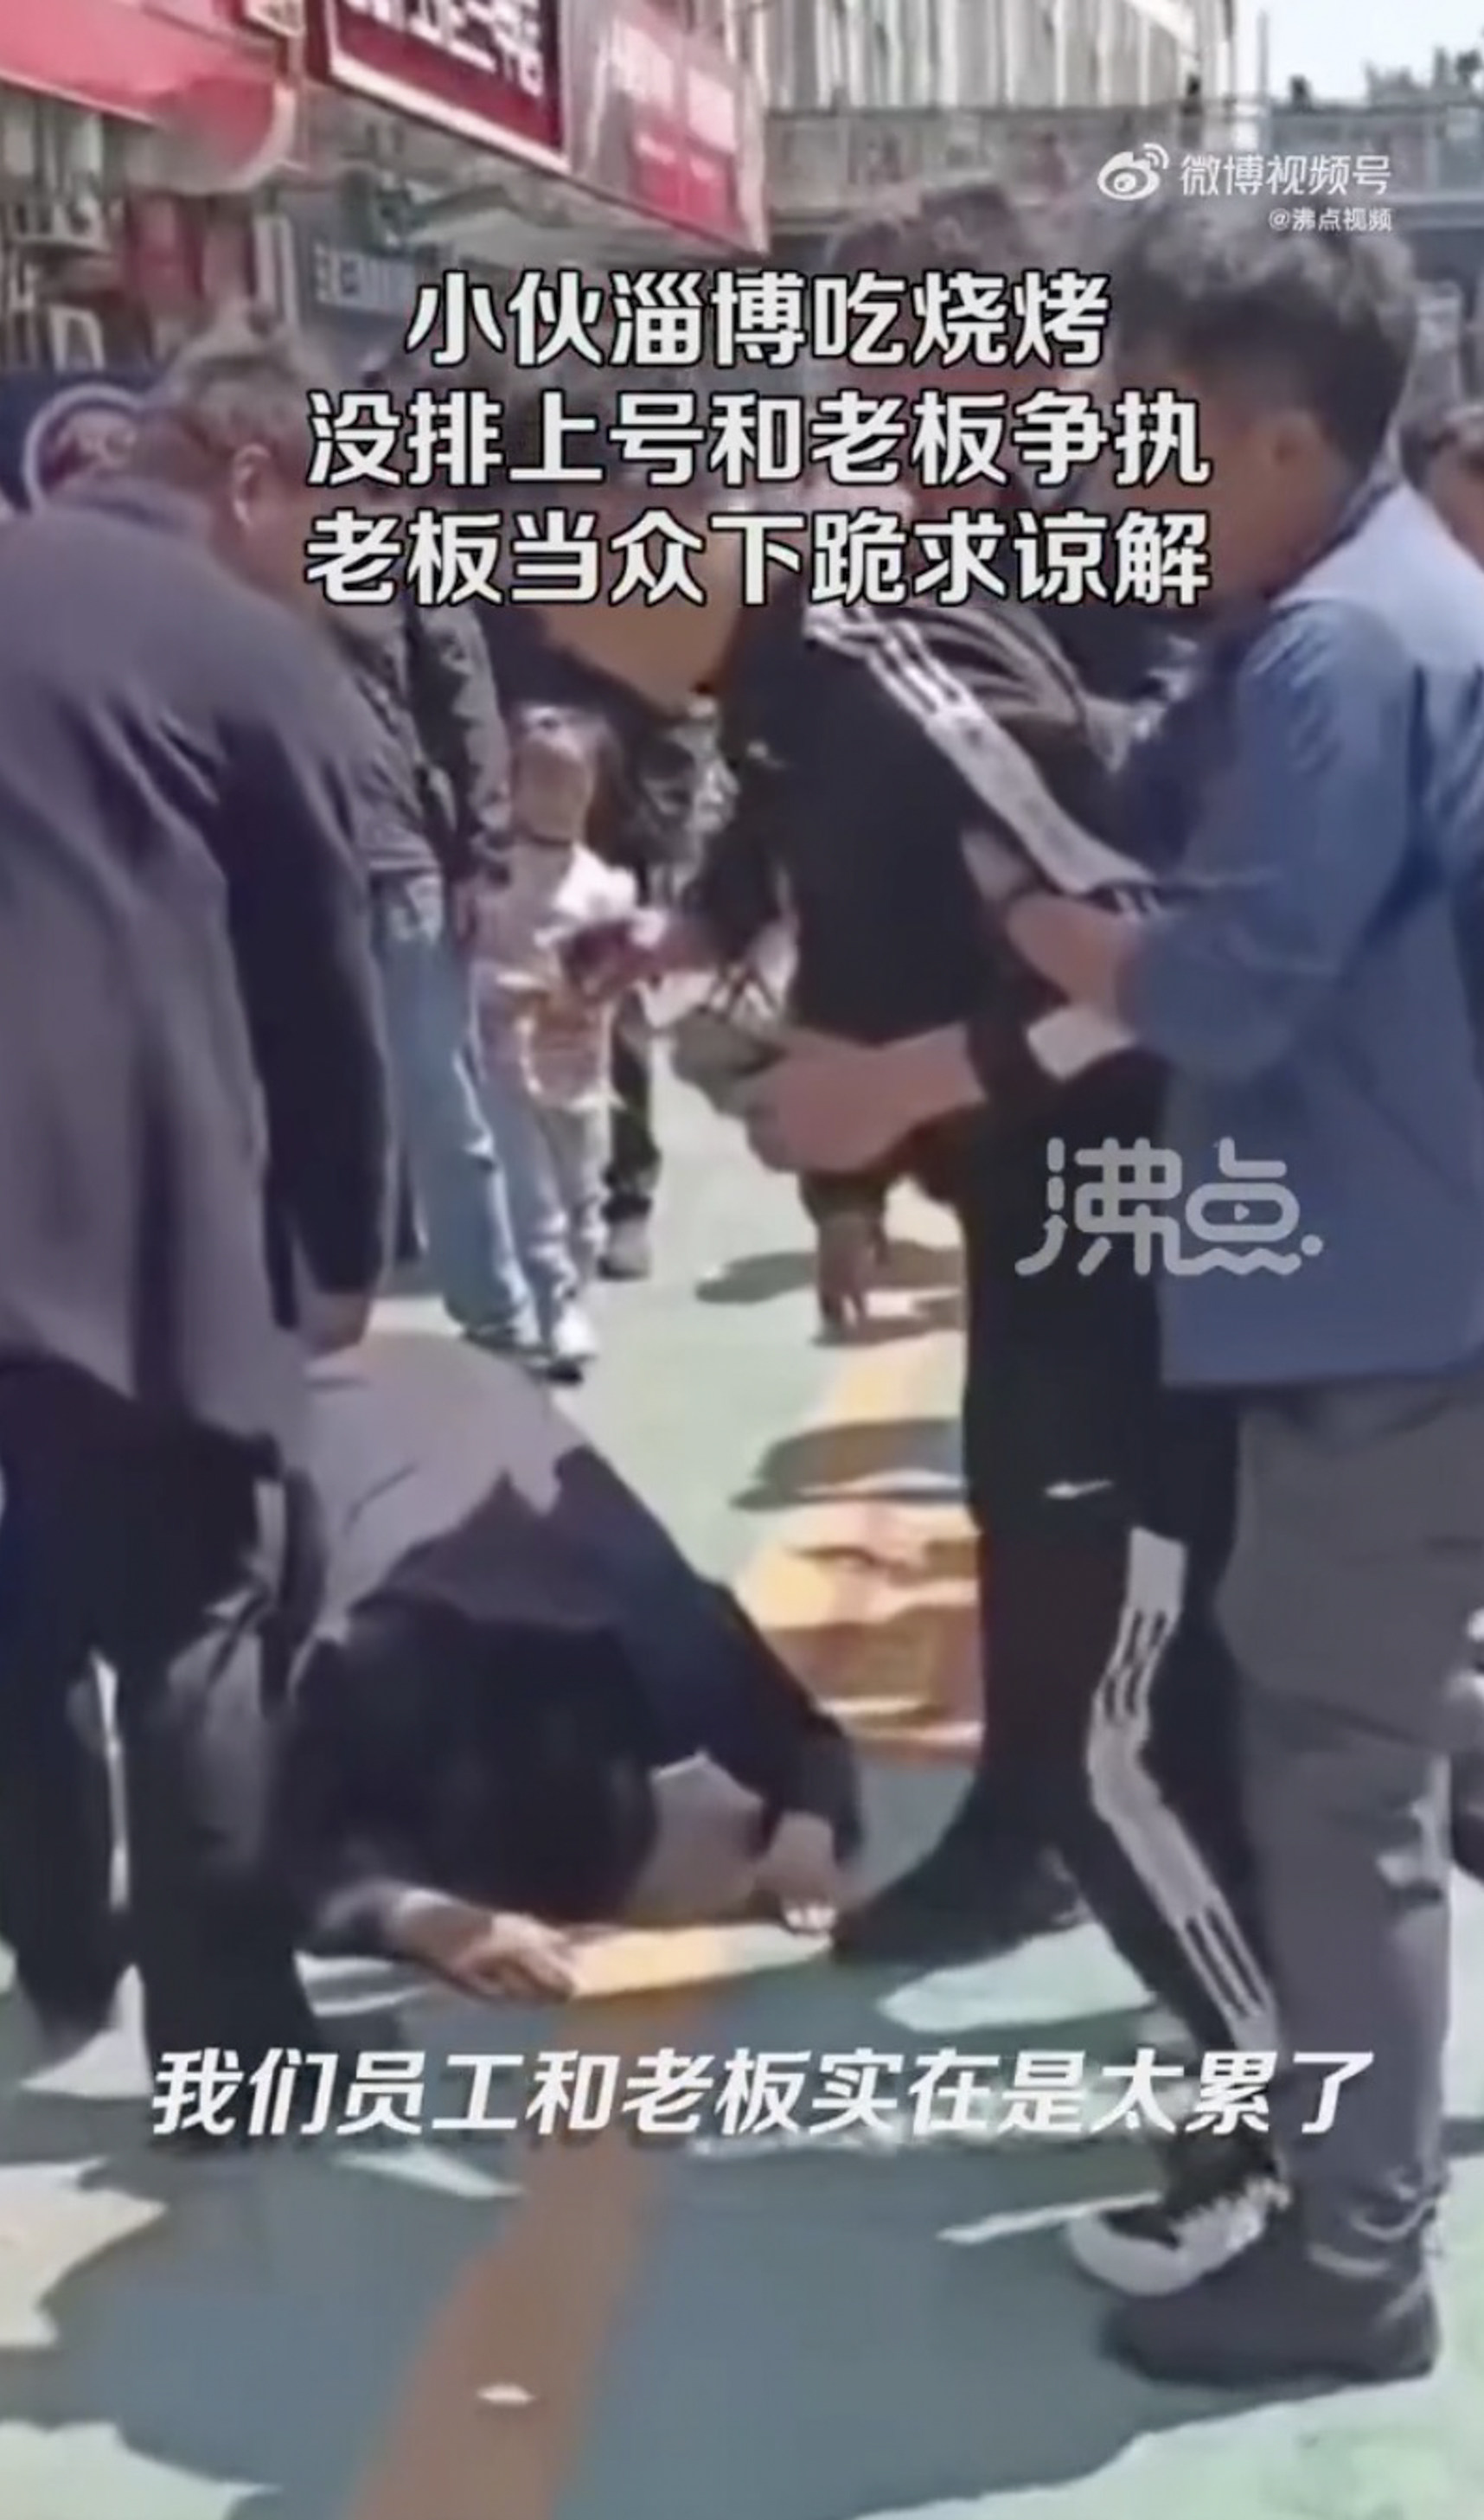 The restaurant boss on his knees begging for forgiveness. His premises can only serve 200 customers a day due to its size. Photo: Weibo